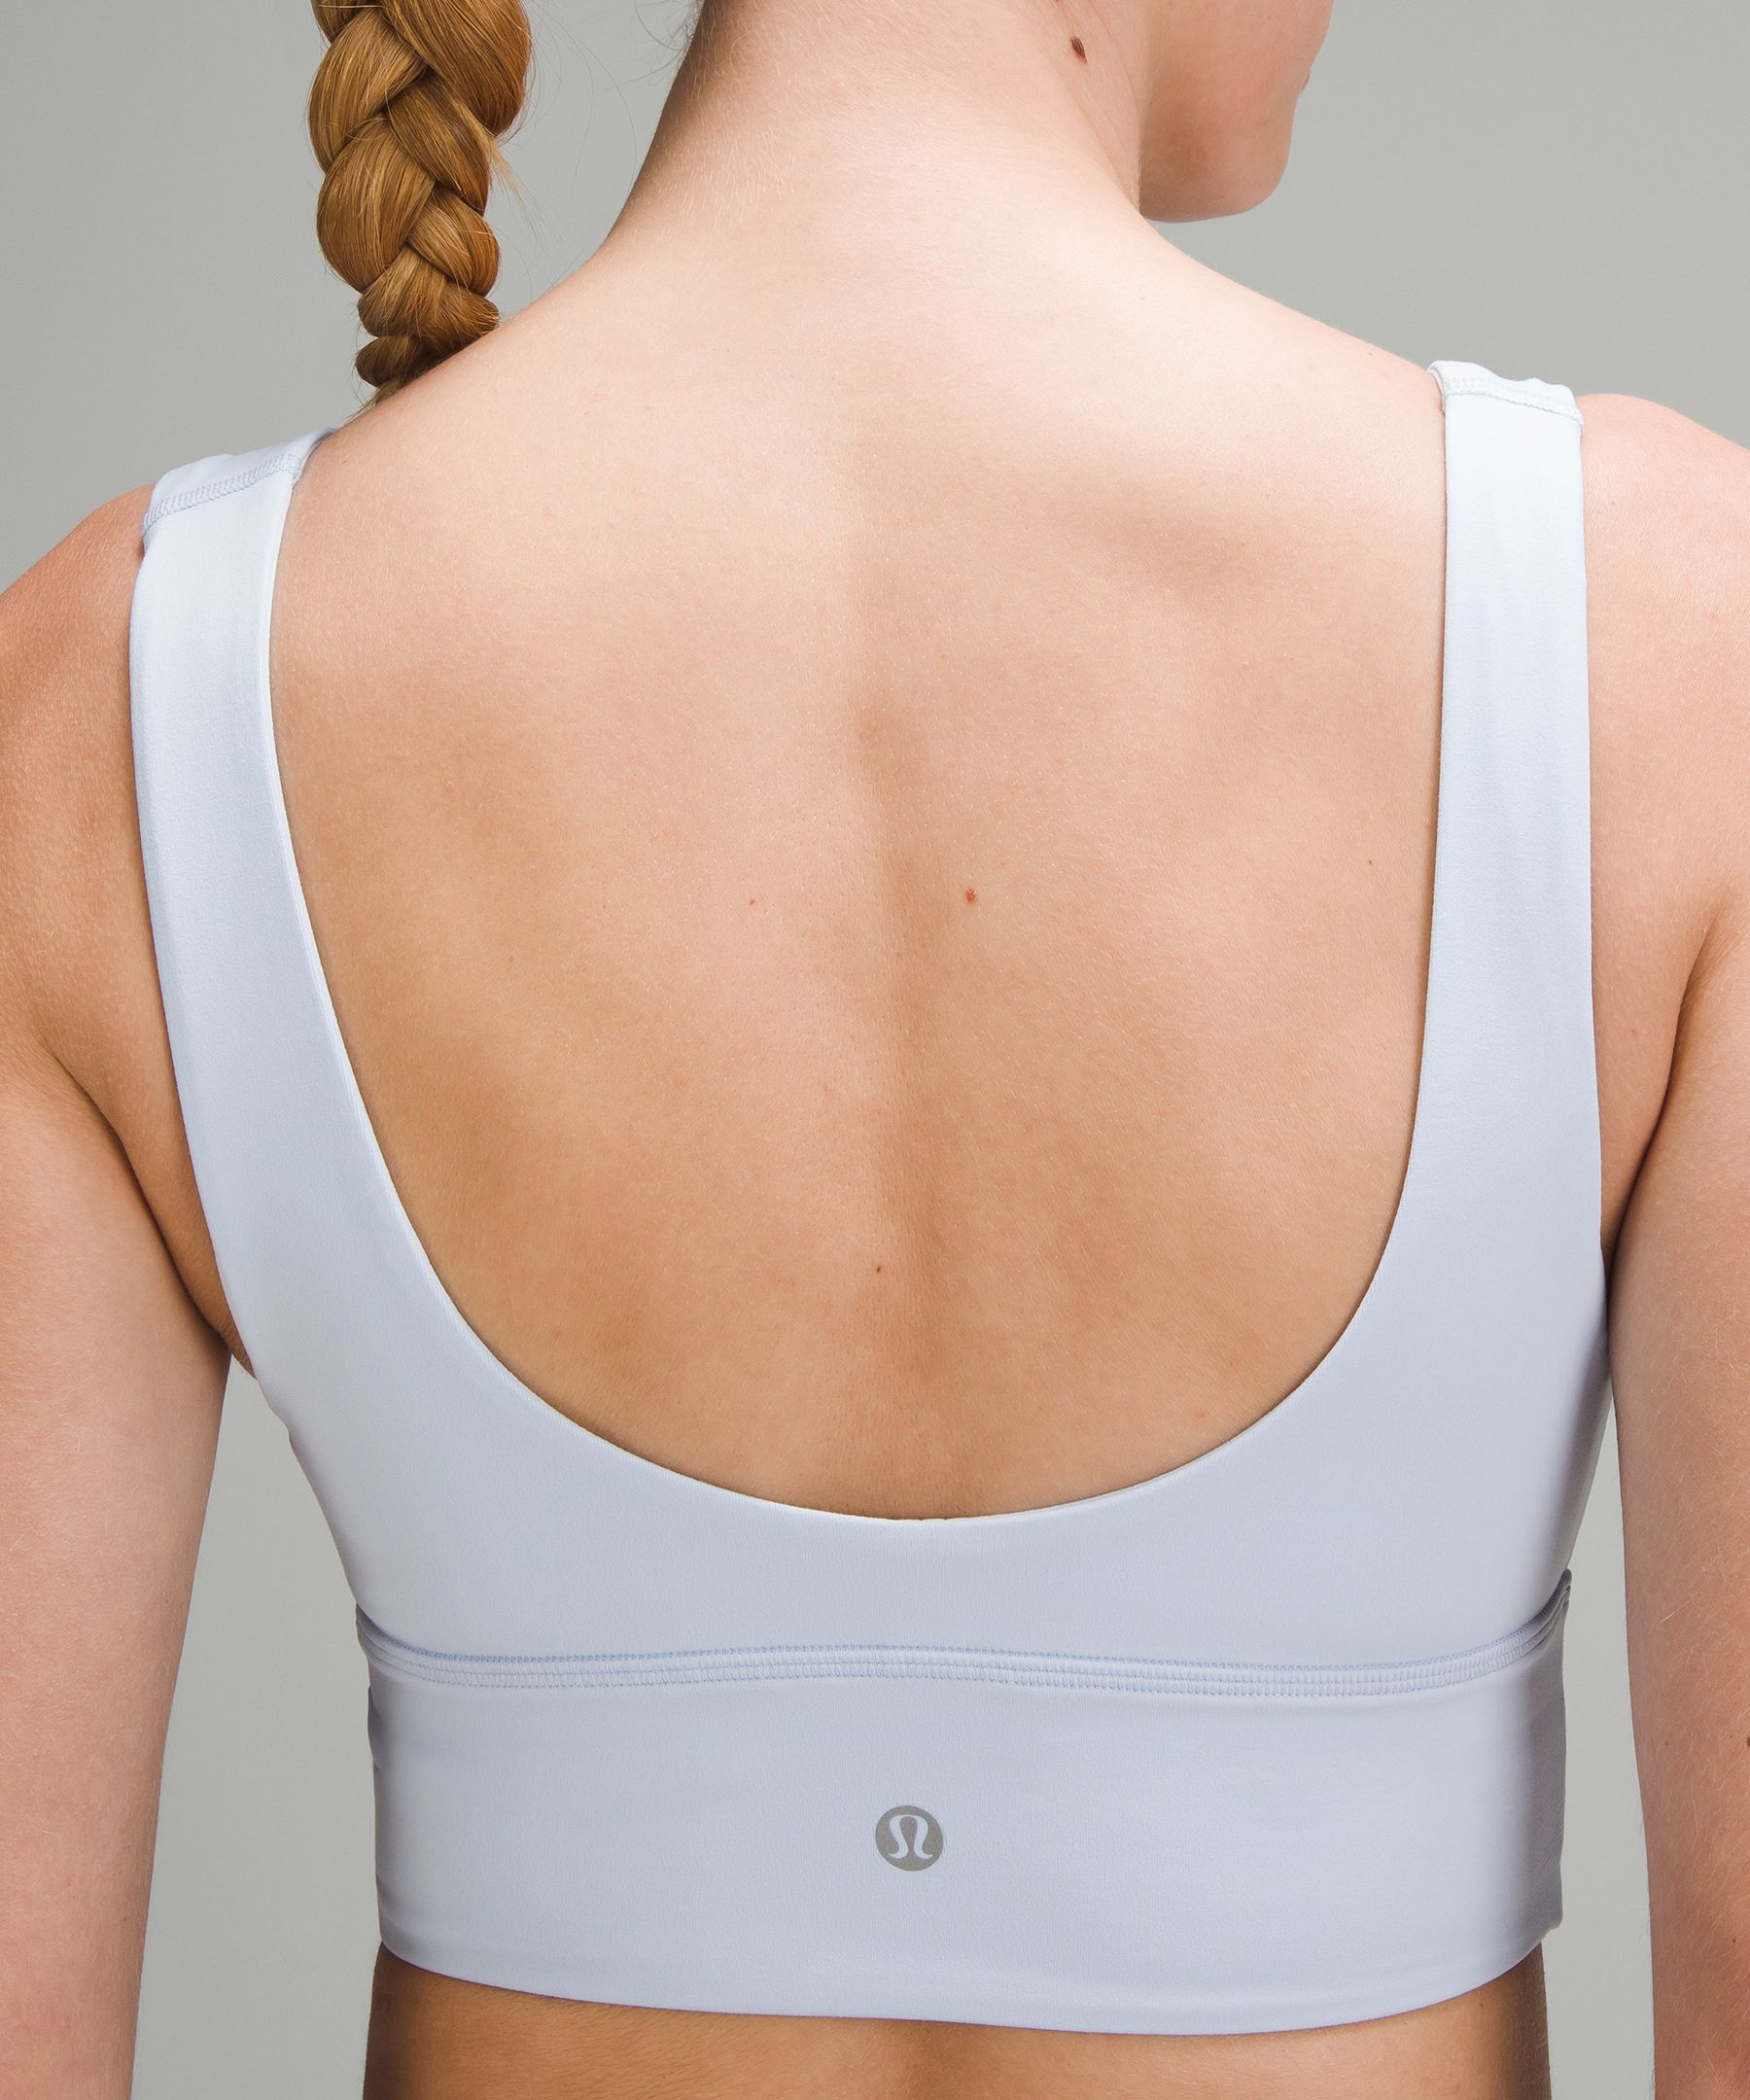 Lululemon V- Neck Align Bra A/B Cup Size XL - $30 (48% Off Retail) New With  Tags - From Alexa